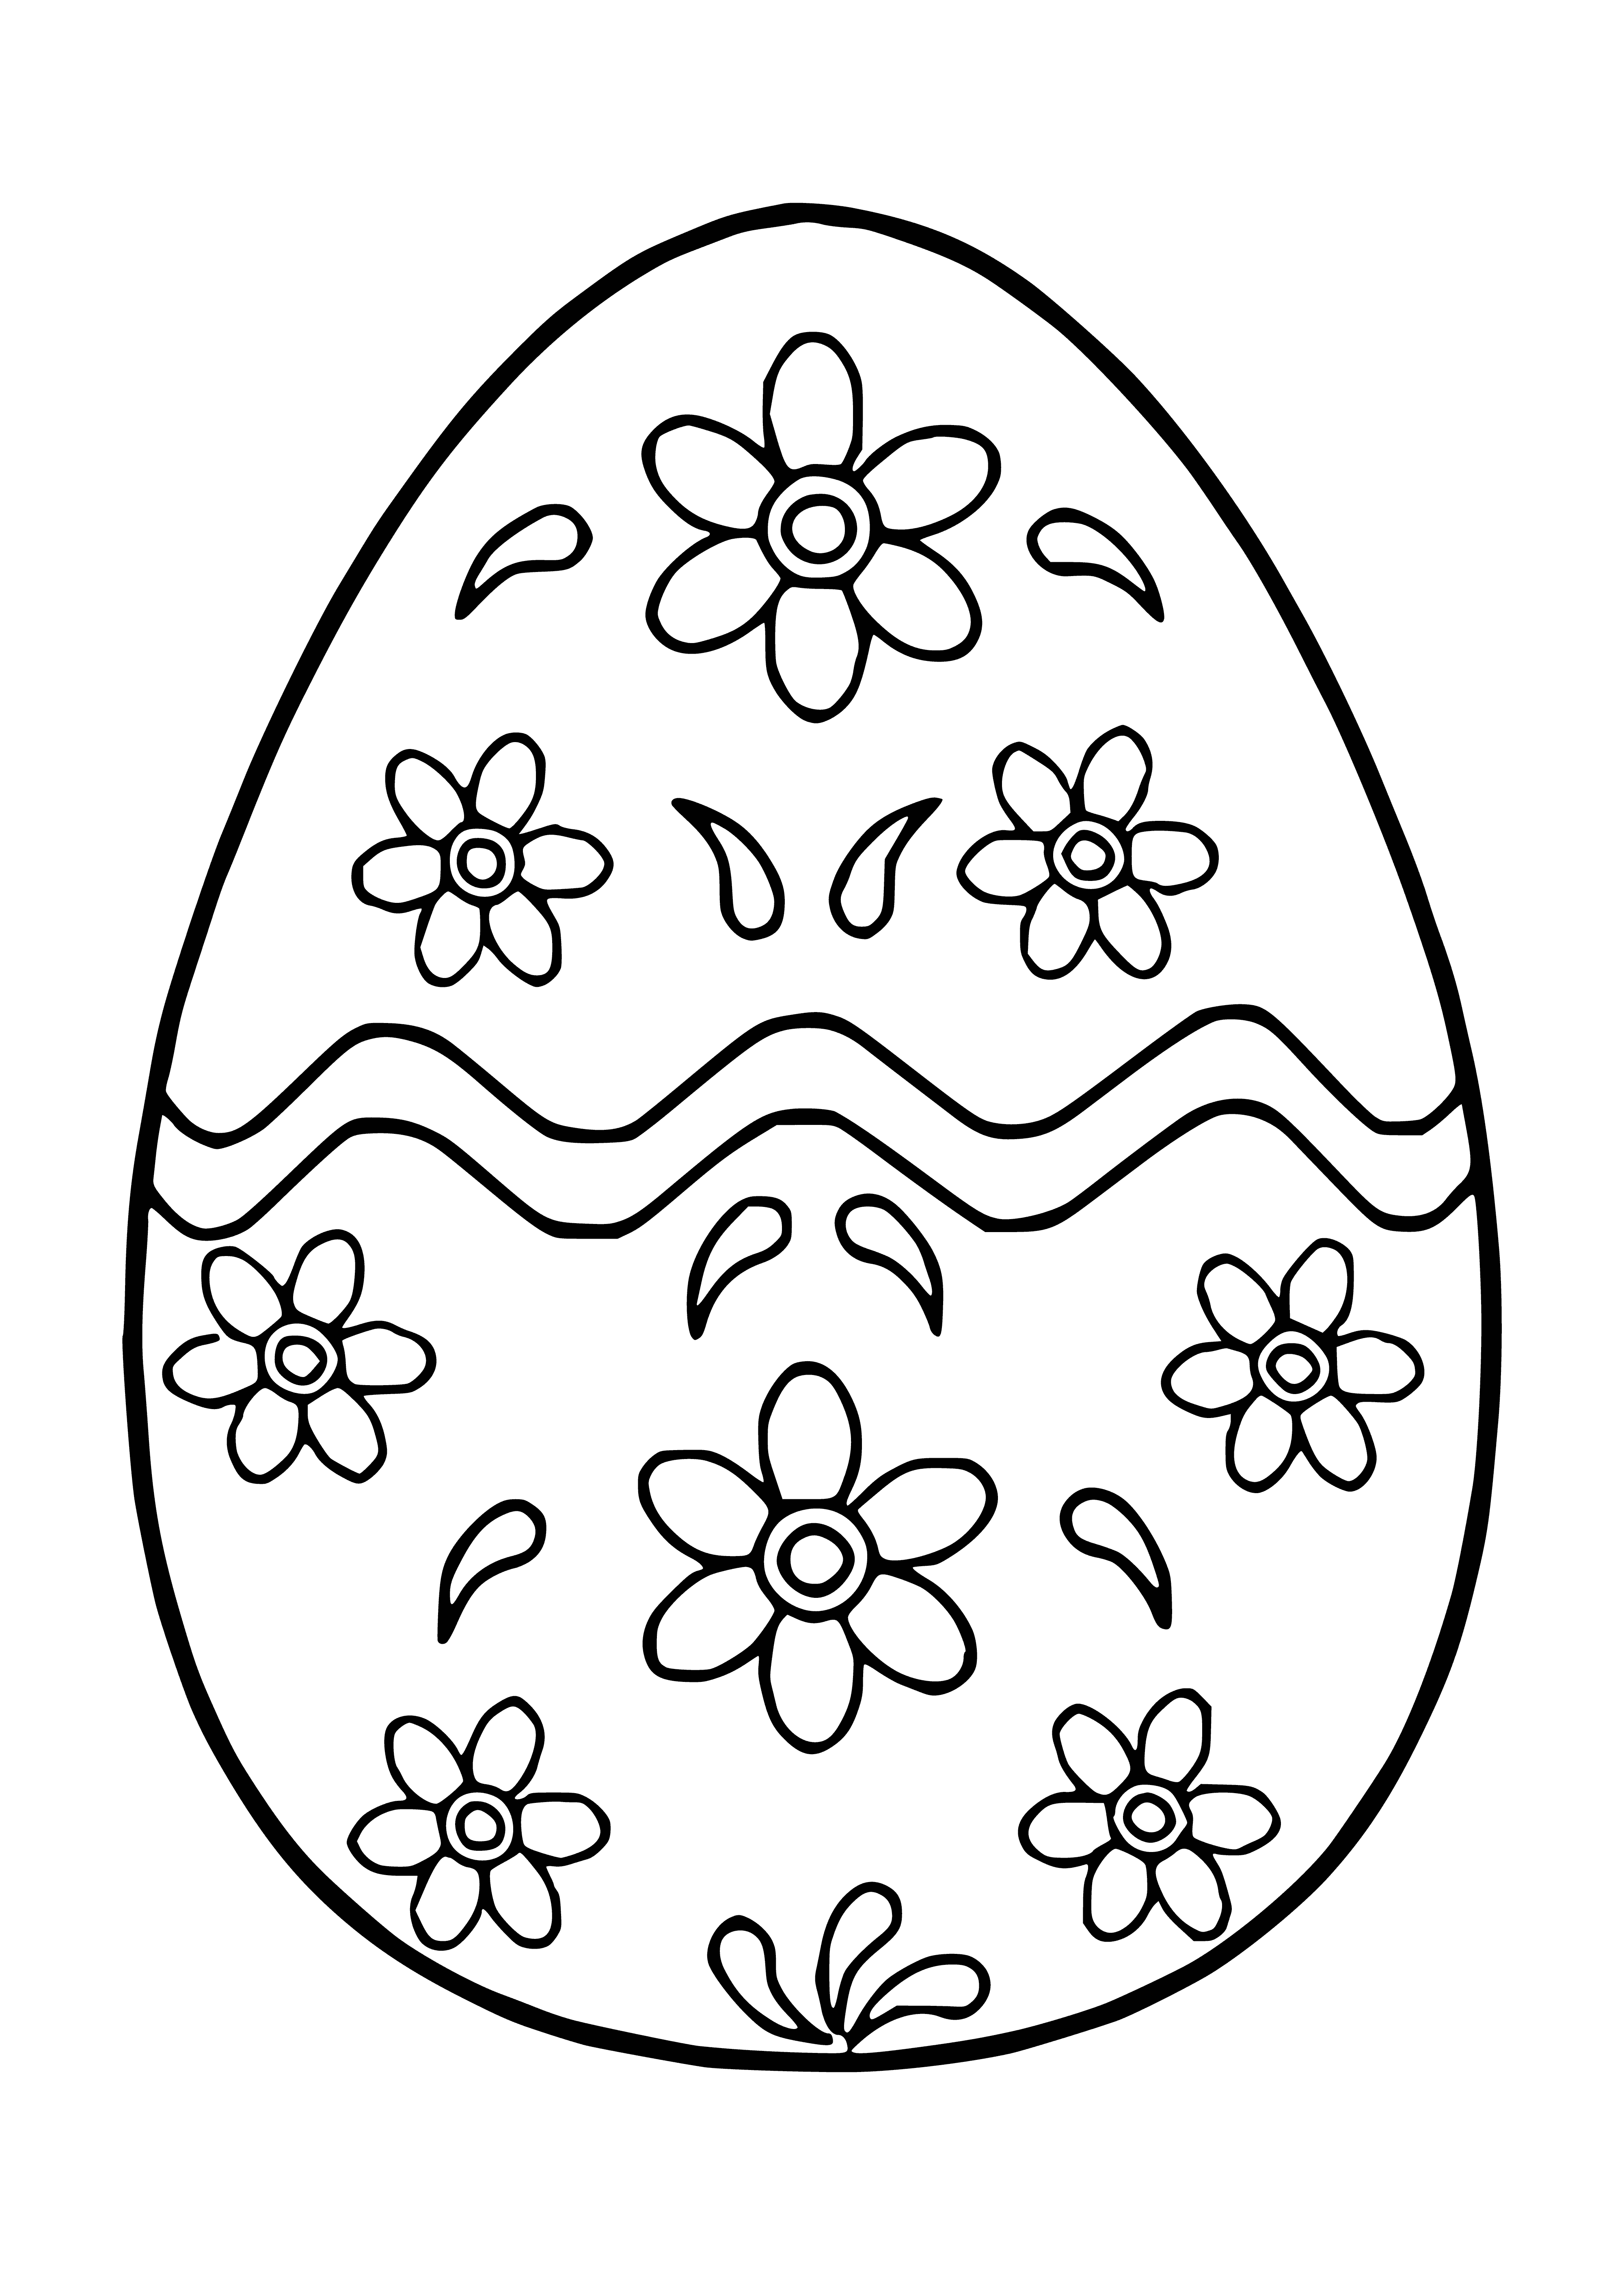 coloring page: #EasterEgg #ColoringPage